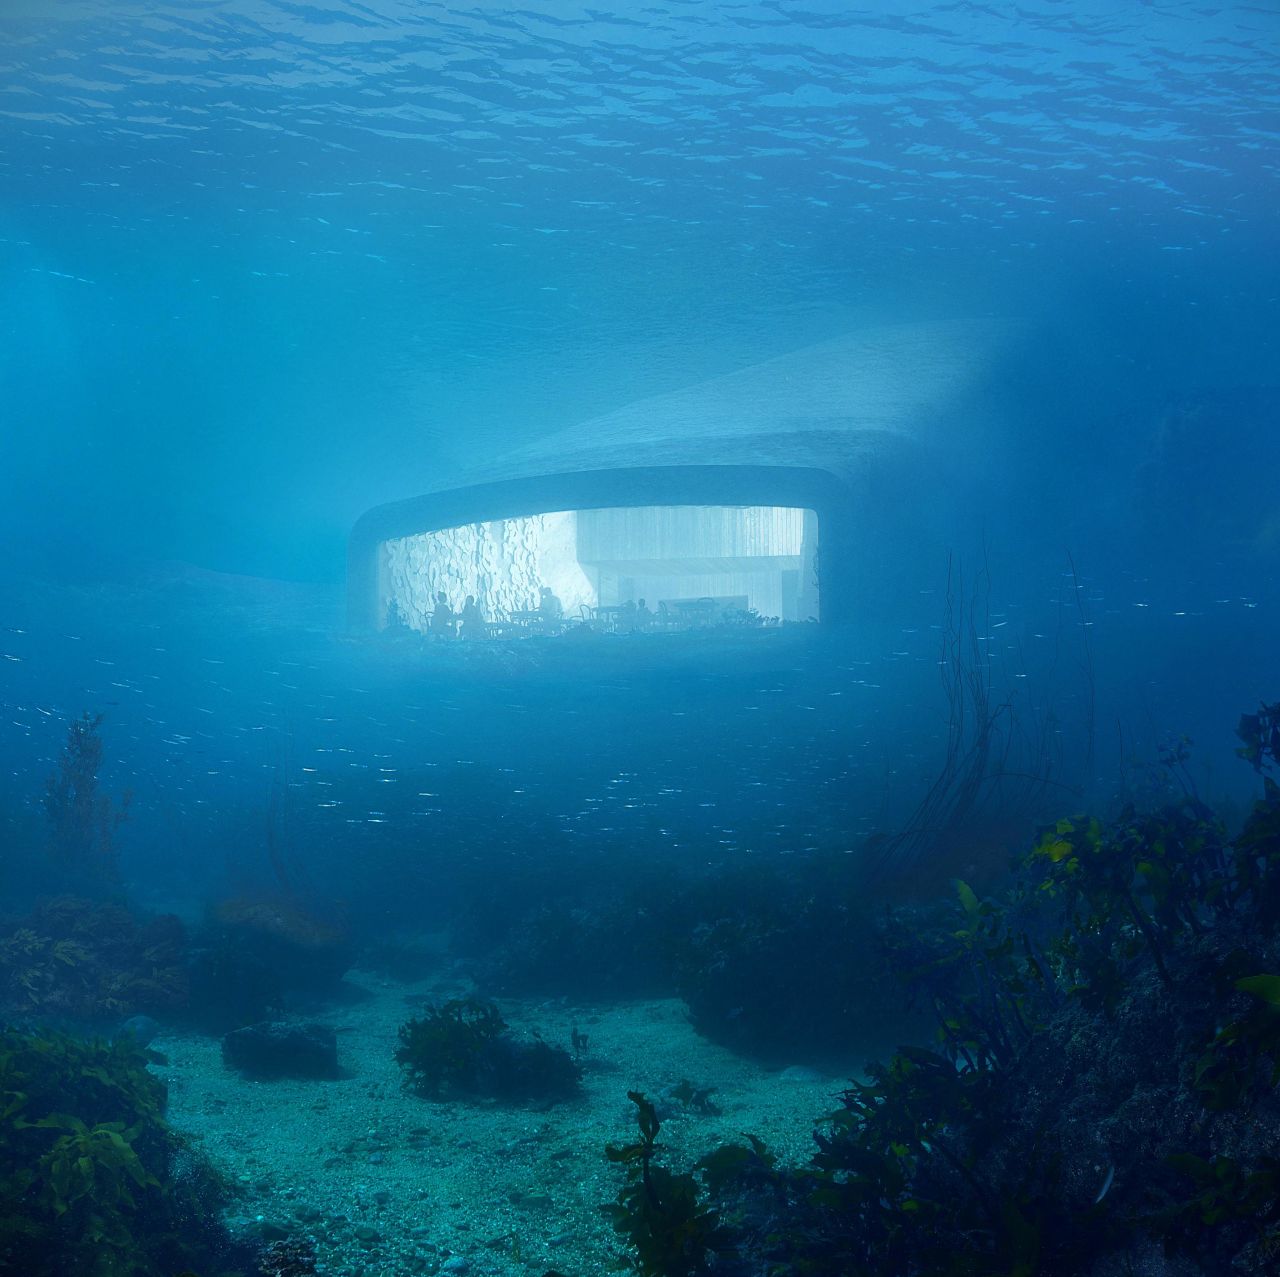 A large, 36-foot wide acrylic glass window will offer underwater views to about 35-40 seating guests.